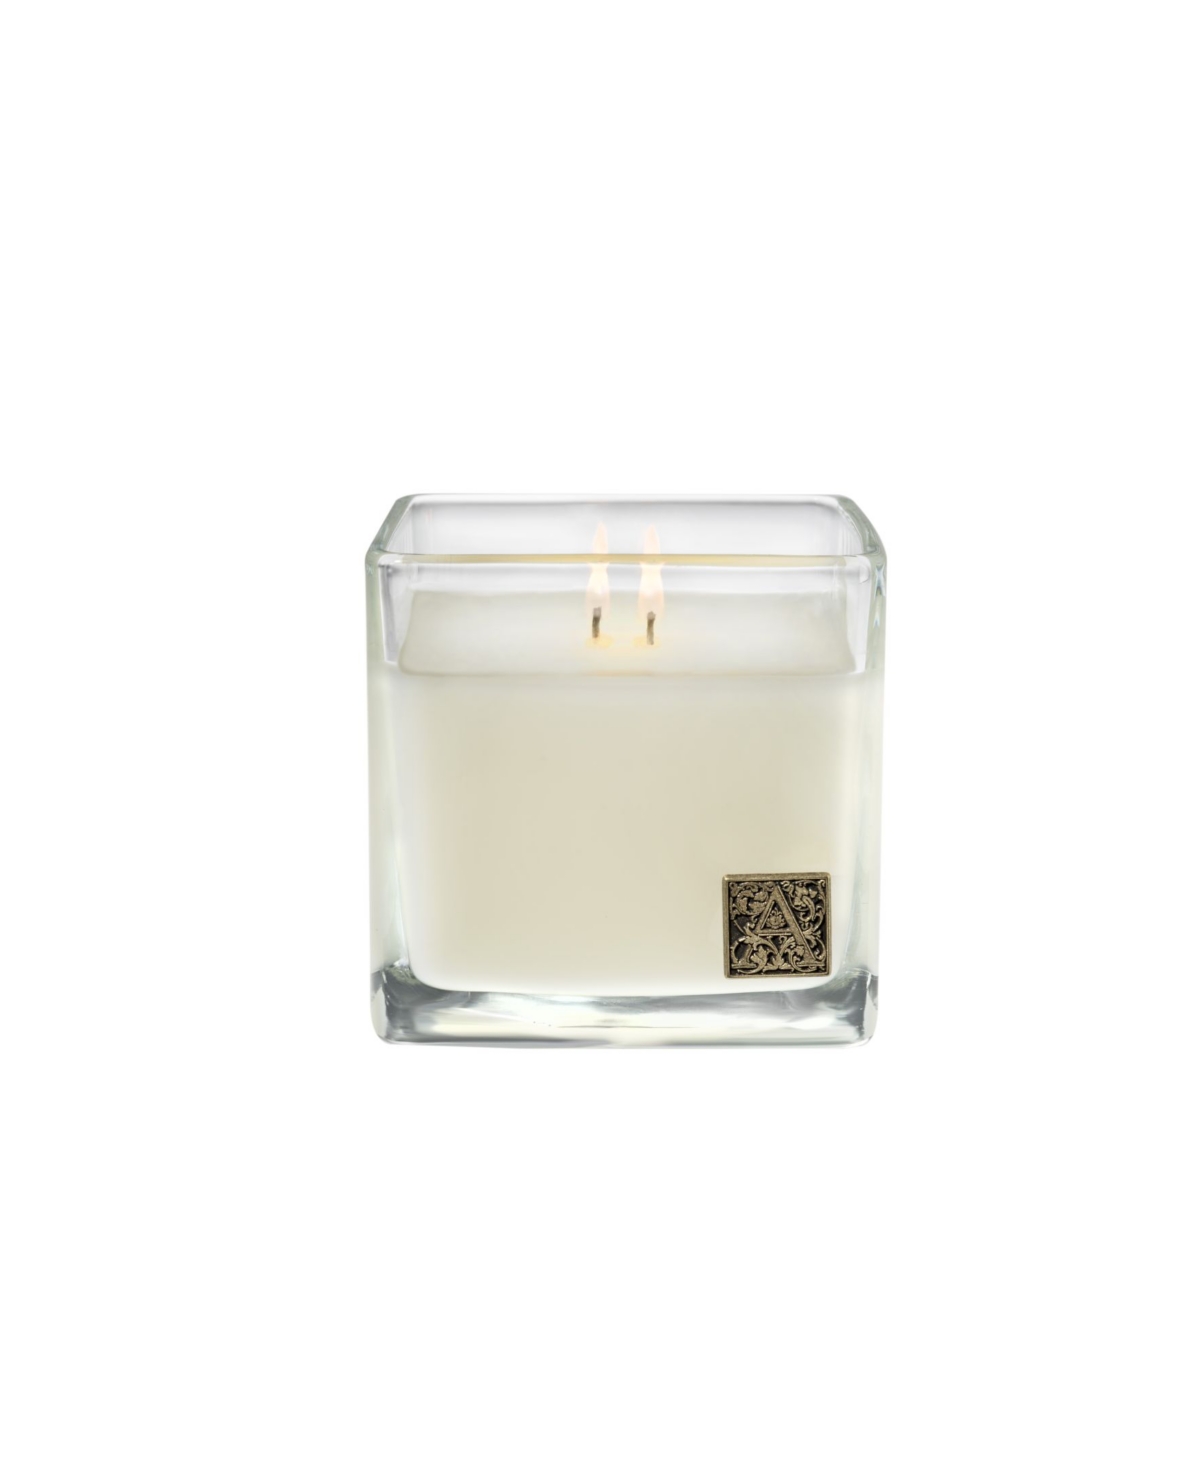 Aromatique Gingerbread Brulee Cube Candle